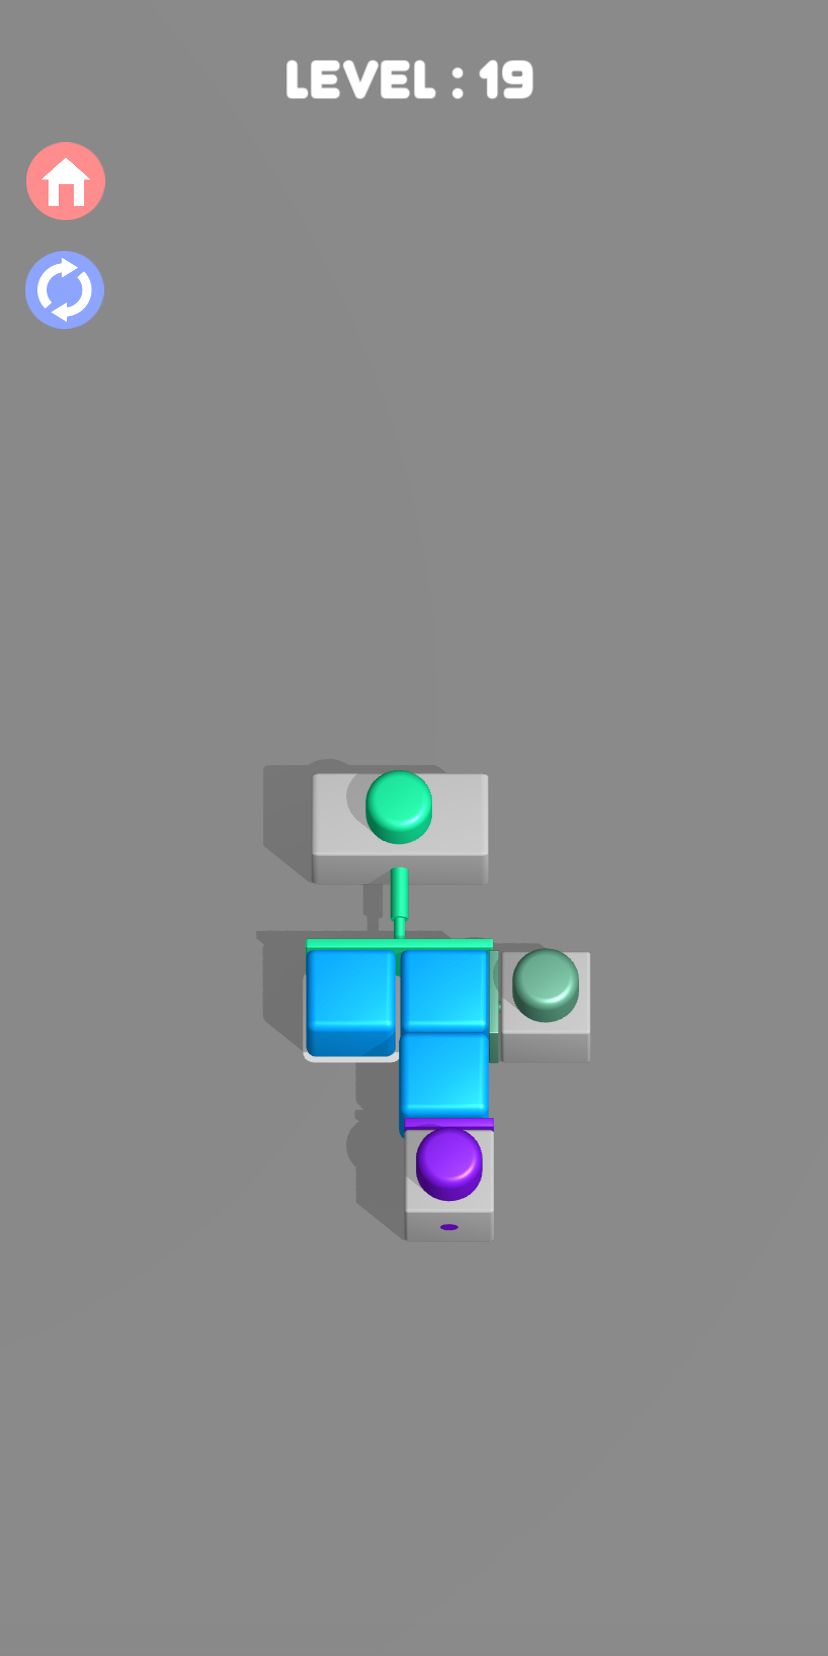 Push them all 3D - Smart block puzzle game for Android